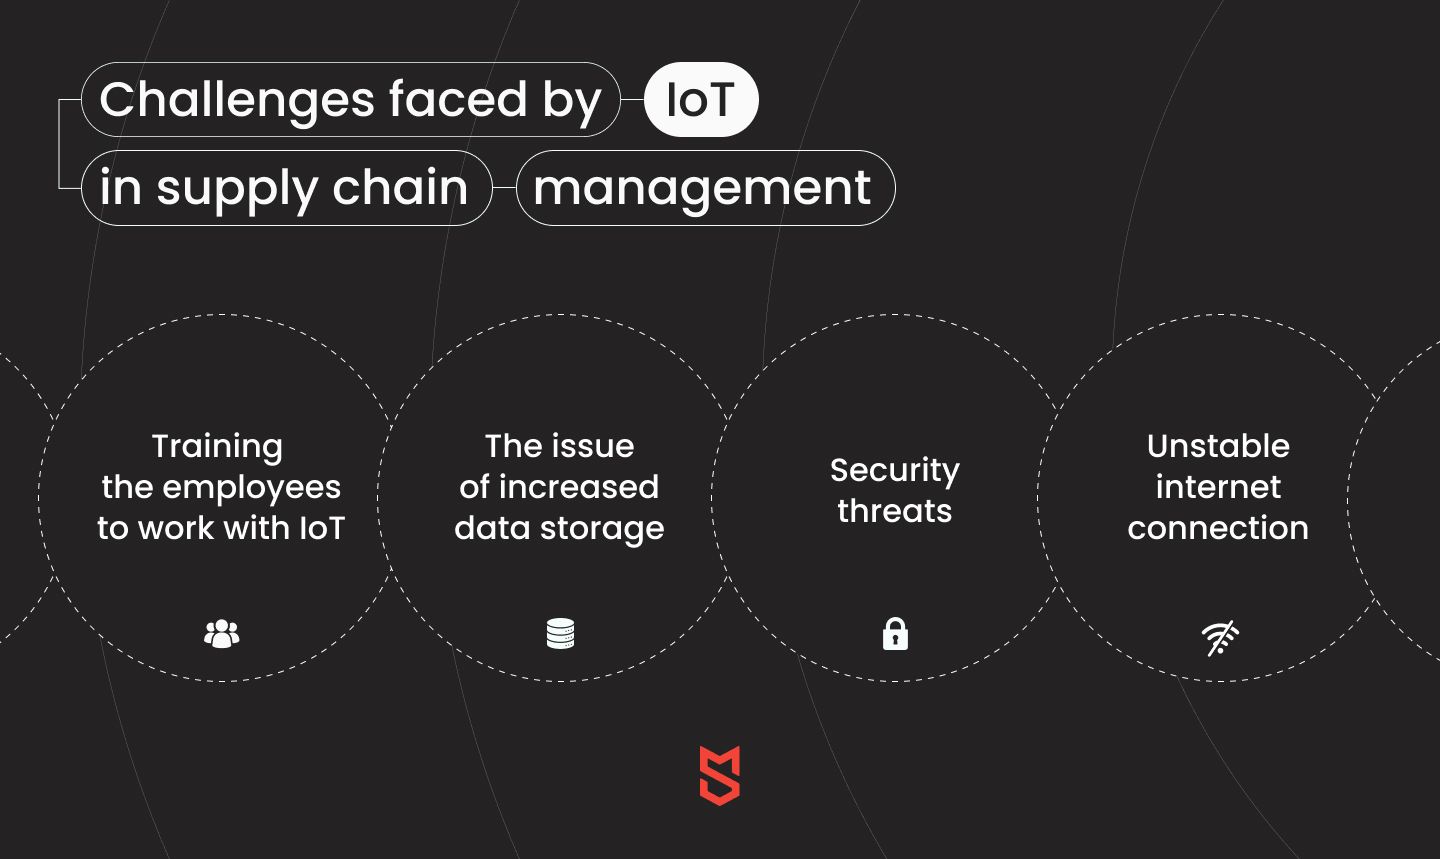 Challenges faced by IoT in supply chain management